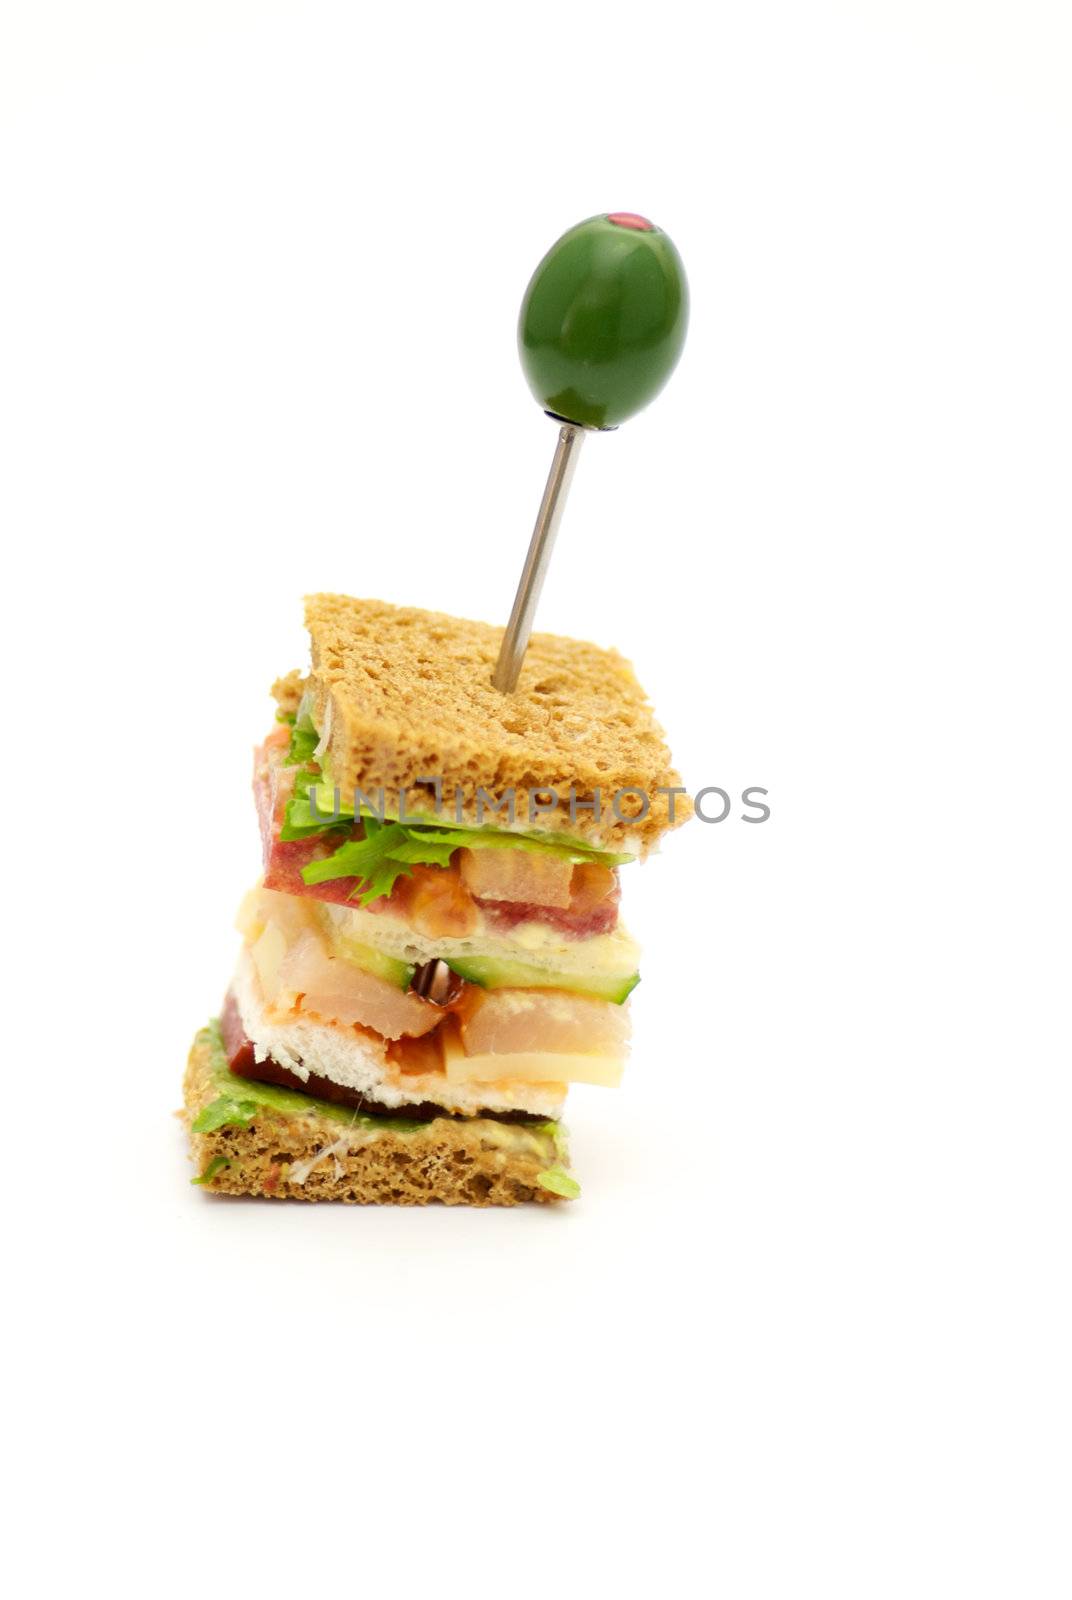 Snack of Classical BLT Club Sandwich isolated on white background